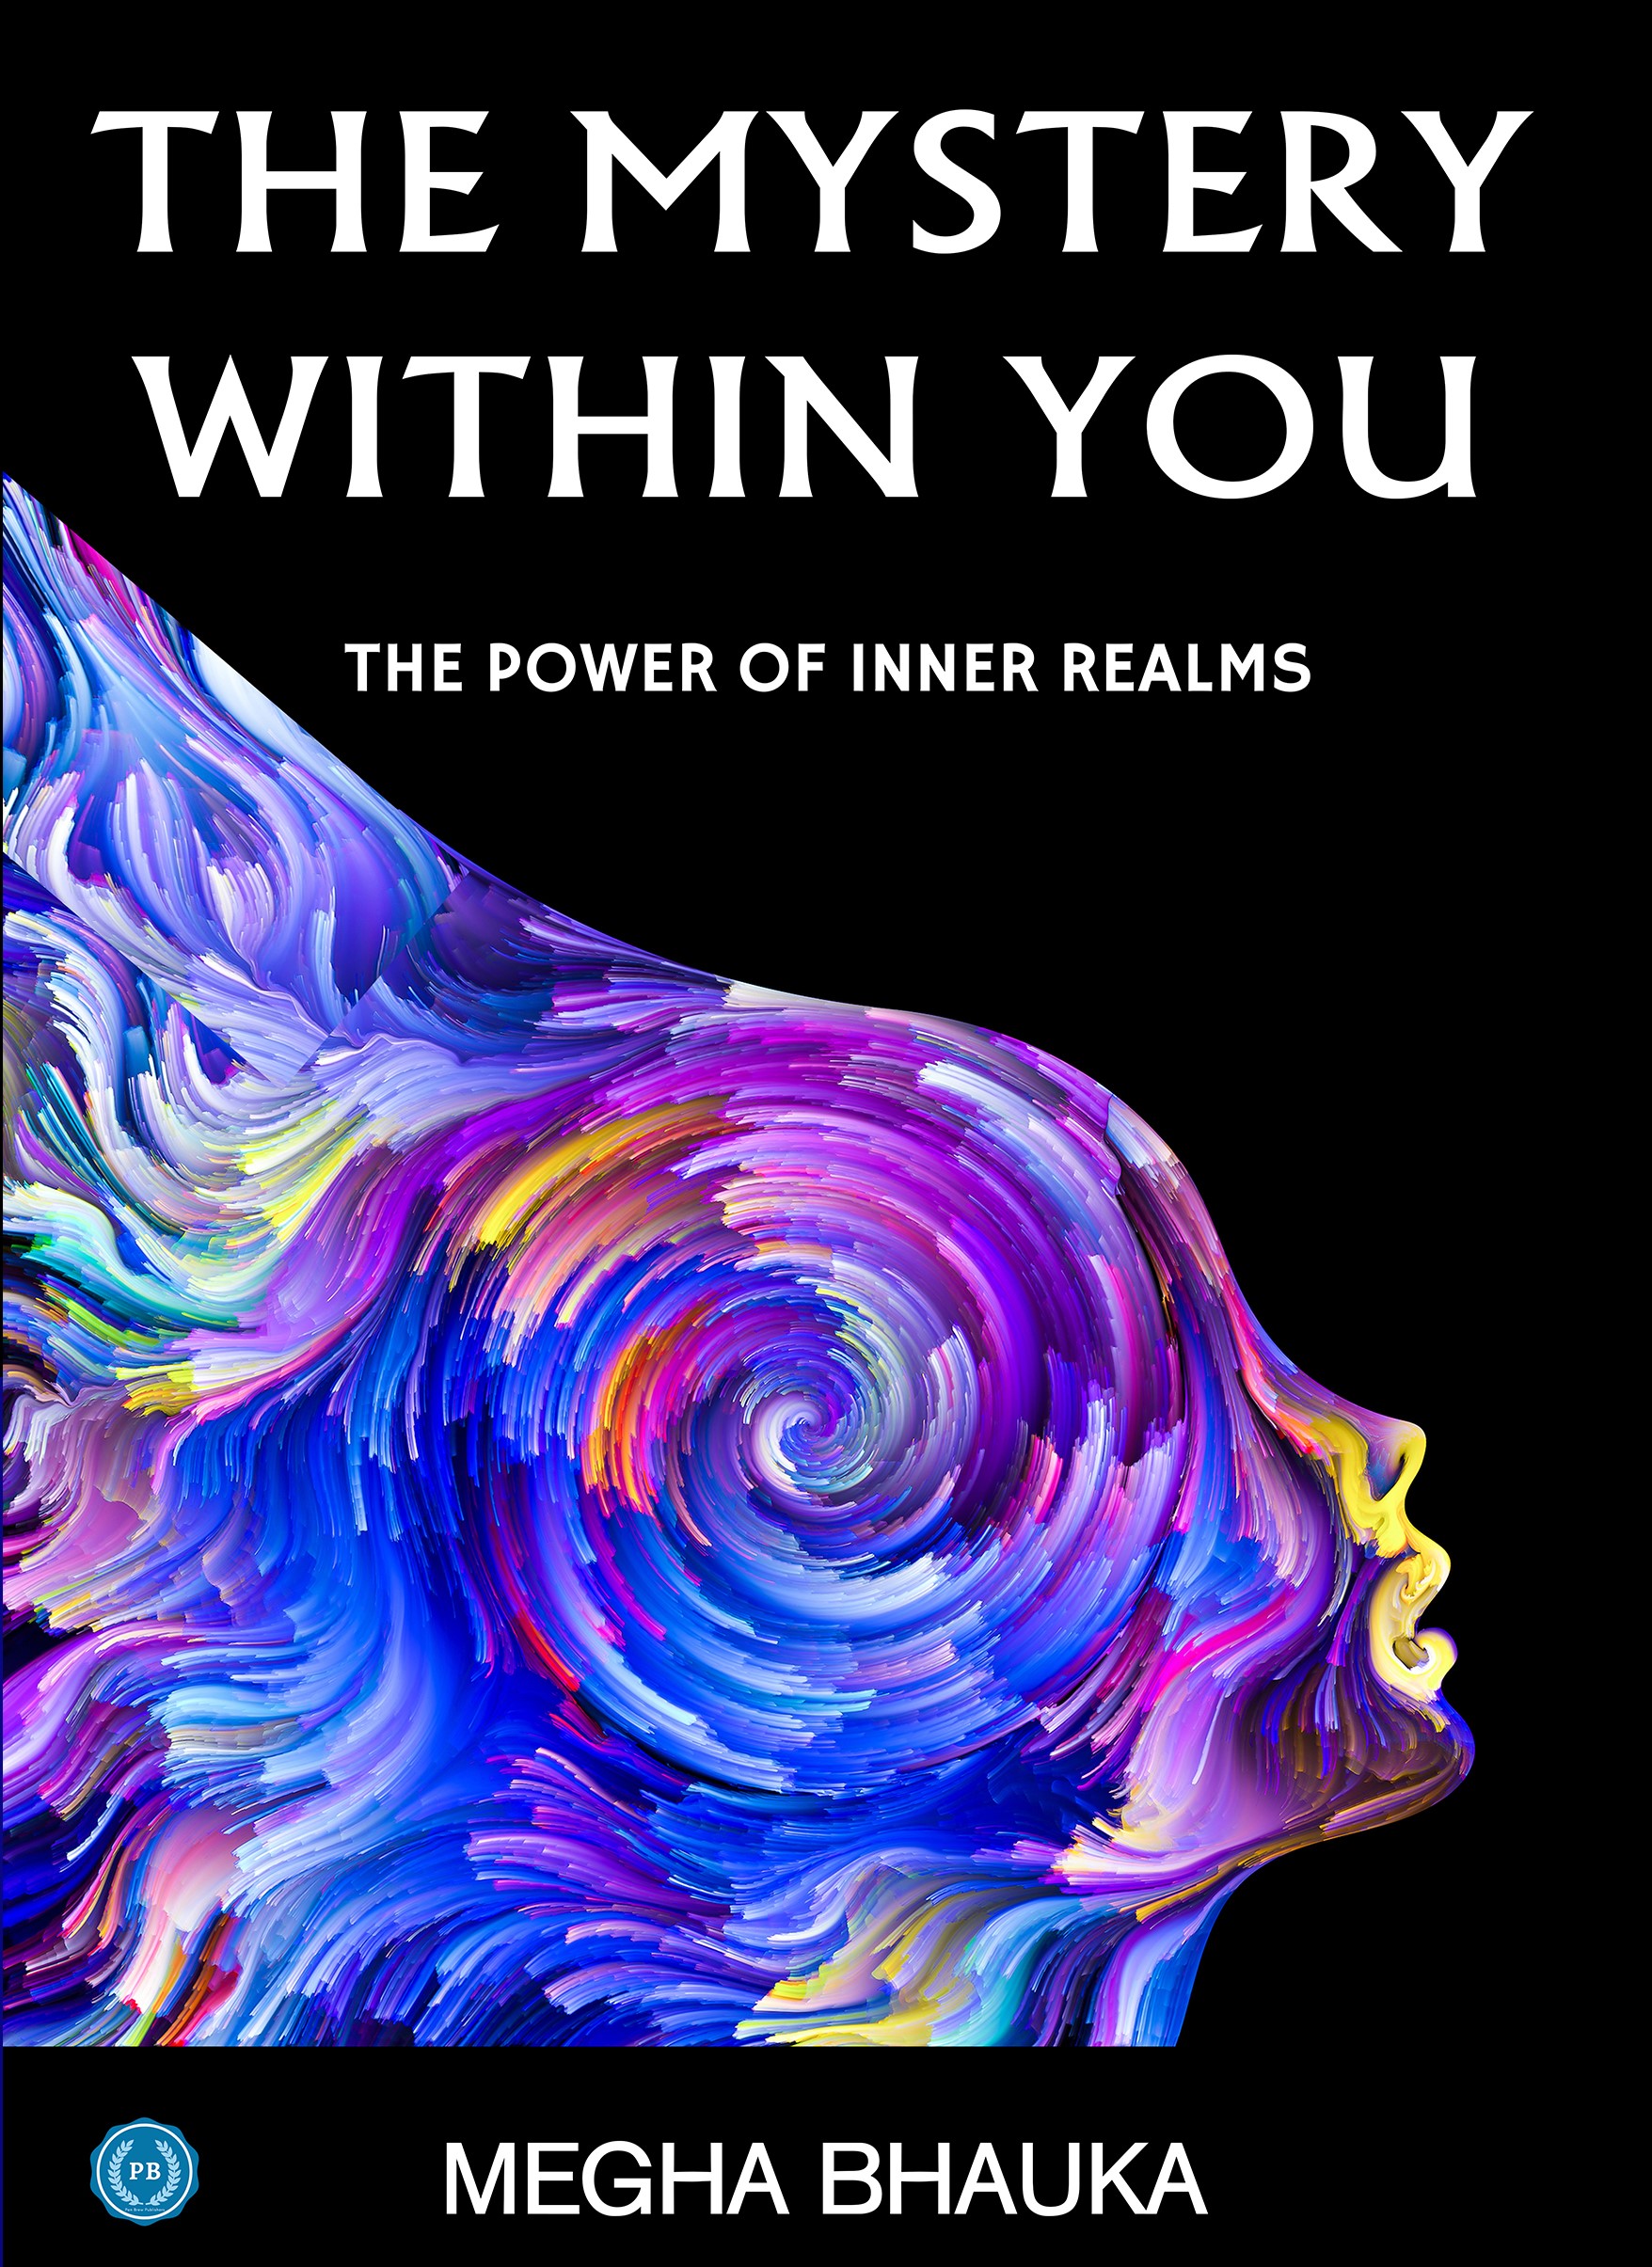 The Mystery Within You by Megha Bhauka